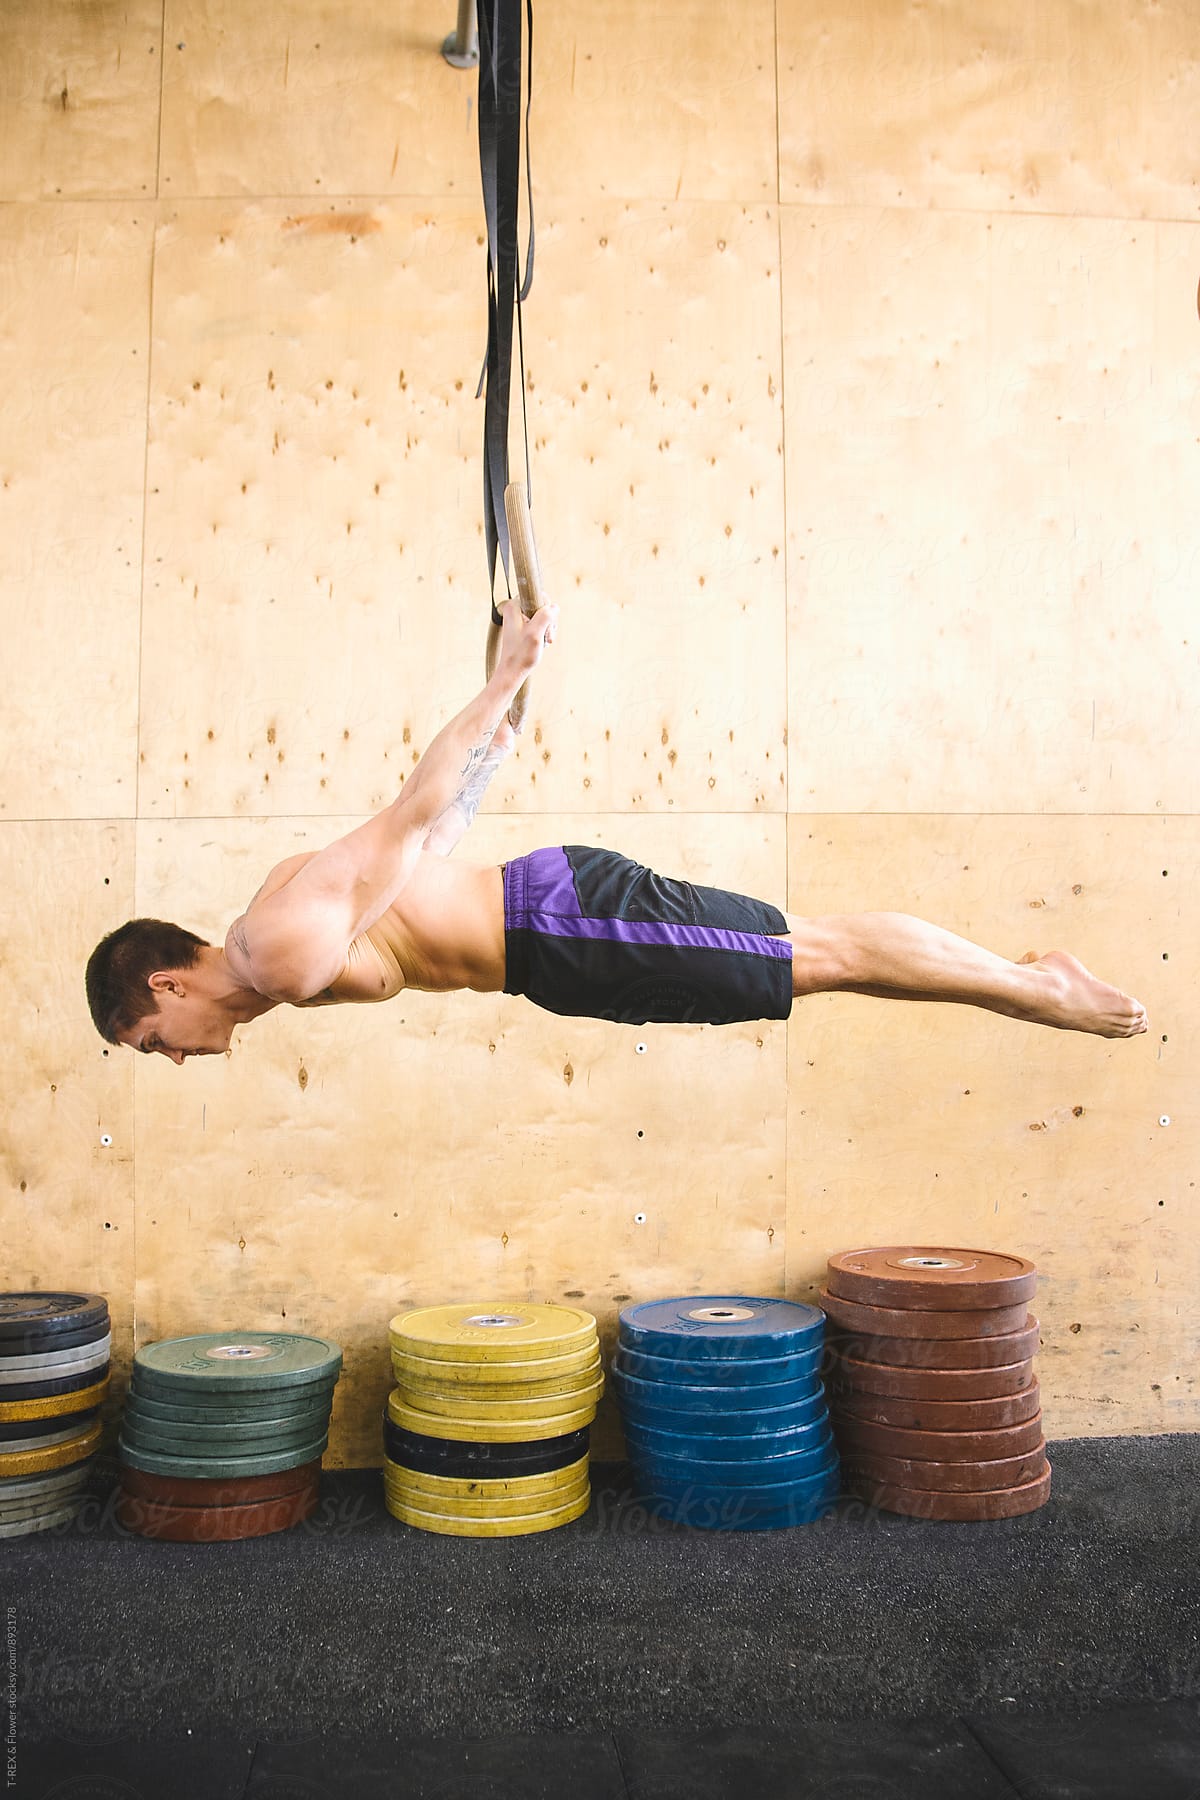 Man performing exercise on gymnastic rings